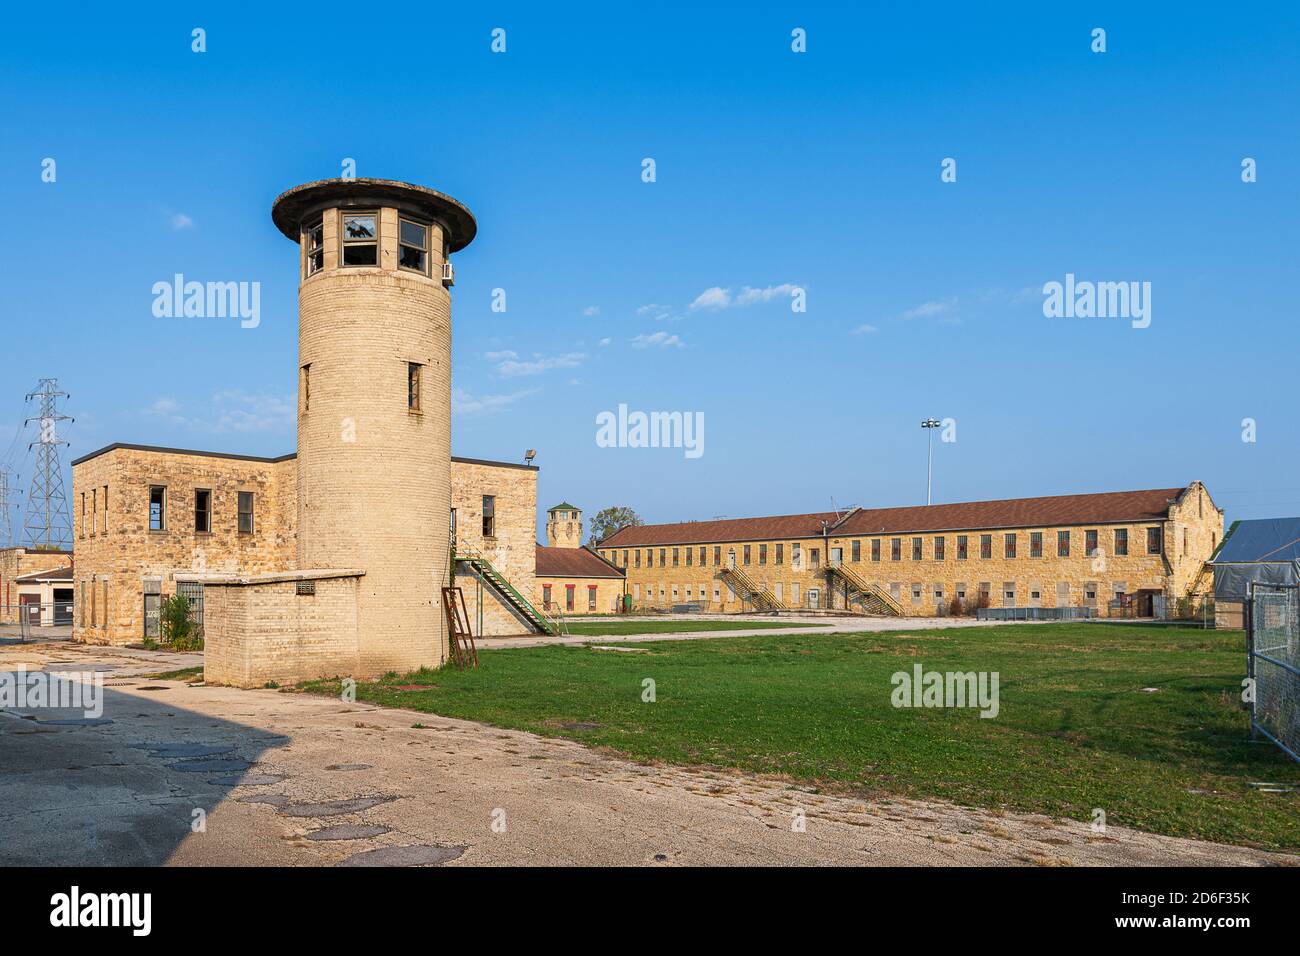 The Yard and guard tower inside the Old Joliet State Prison on 1125 Collins Street in Joliet, Illinois Stock Photo